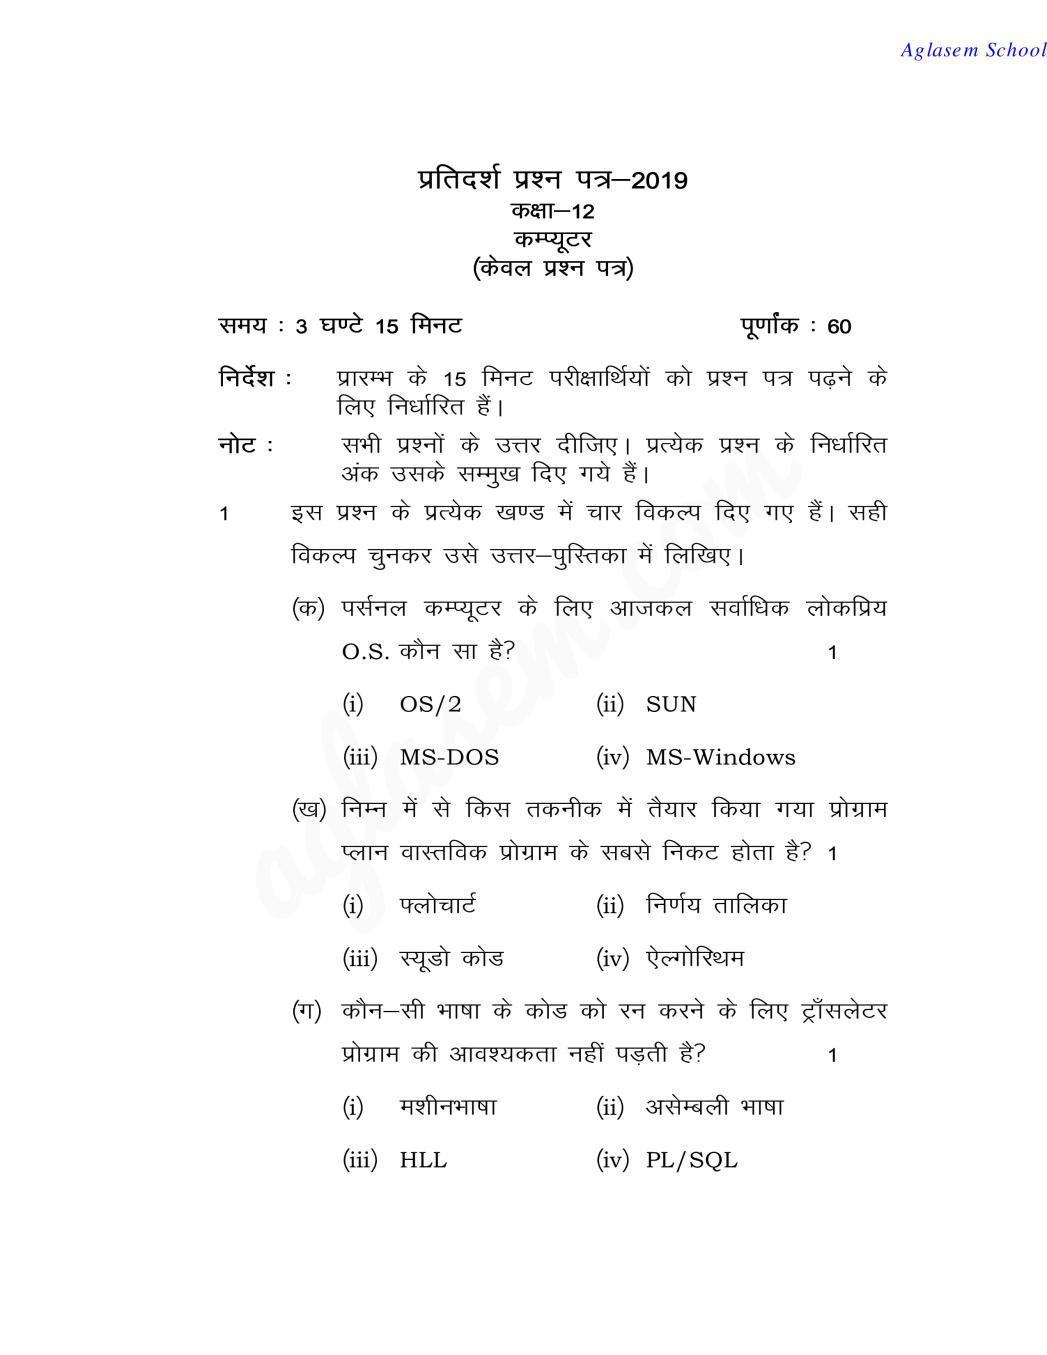 UP Board Class 12 Model Paper 2019 COMPUTER - Page 1